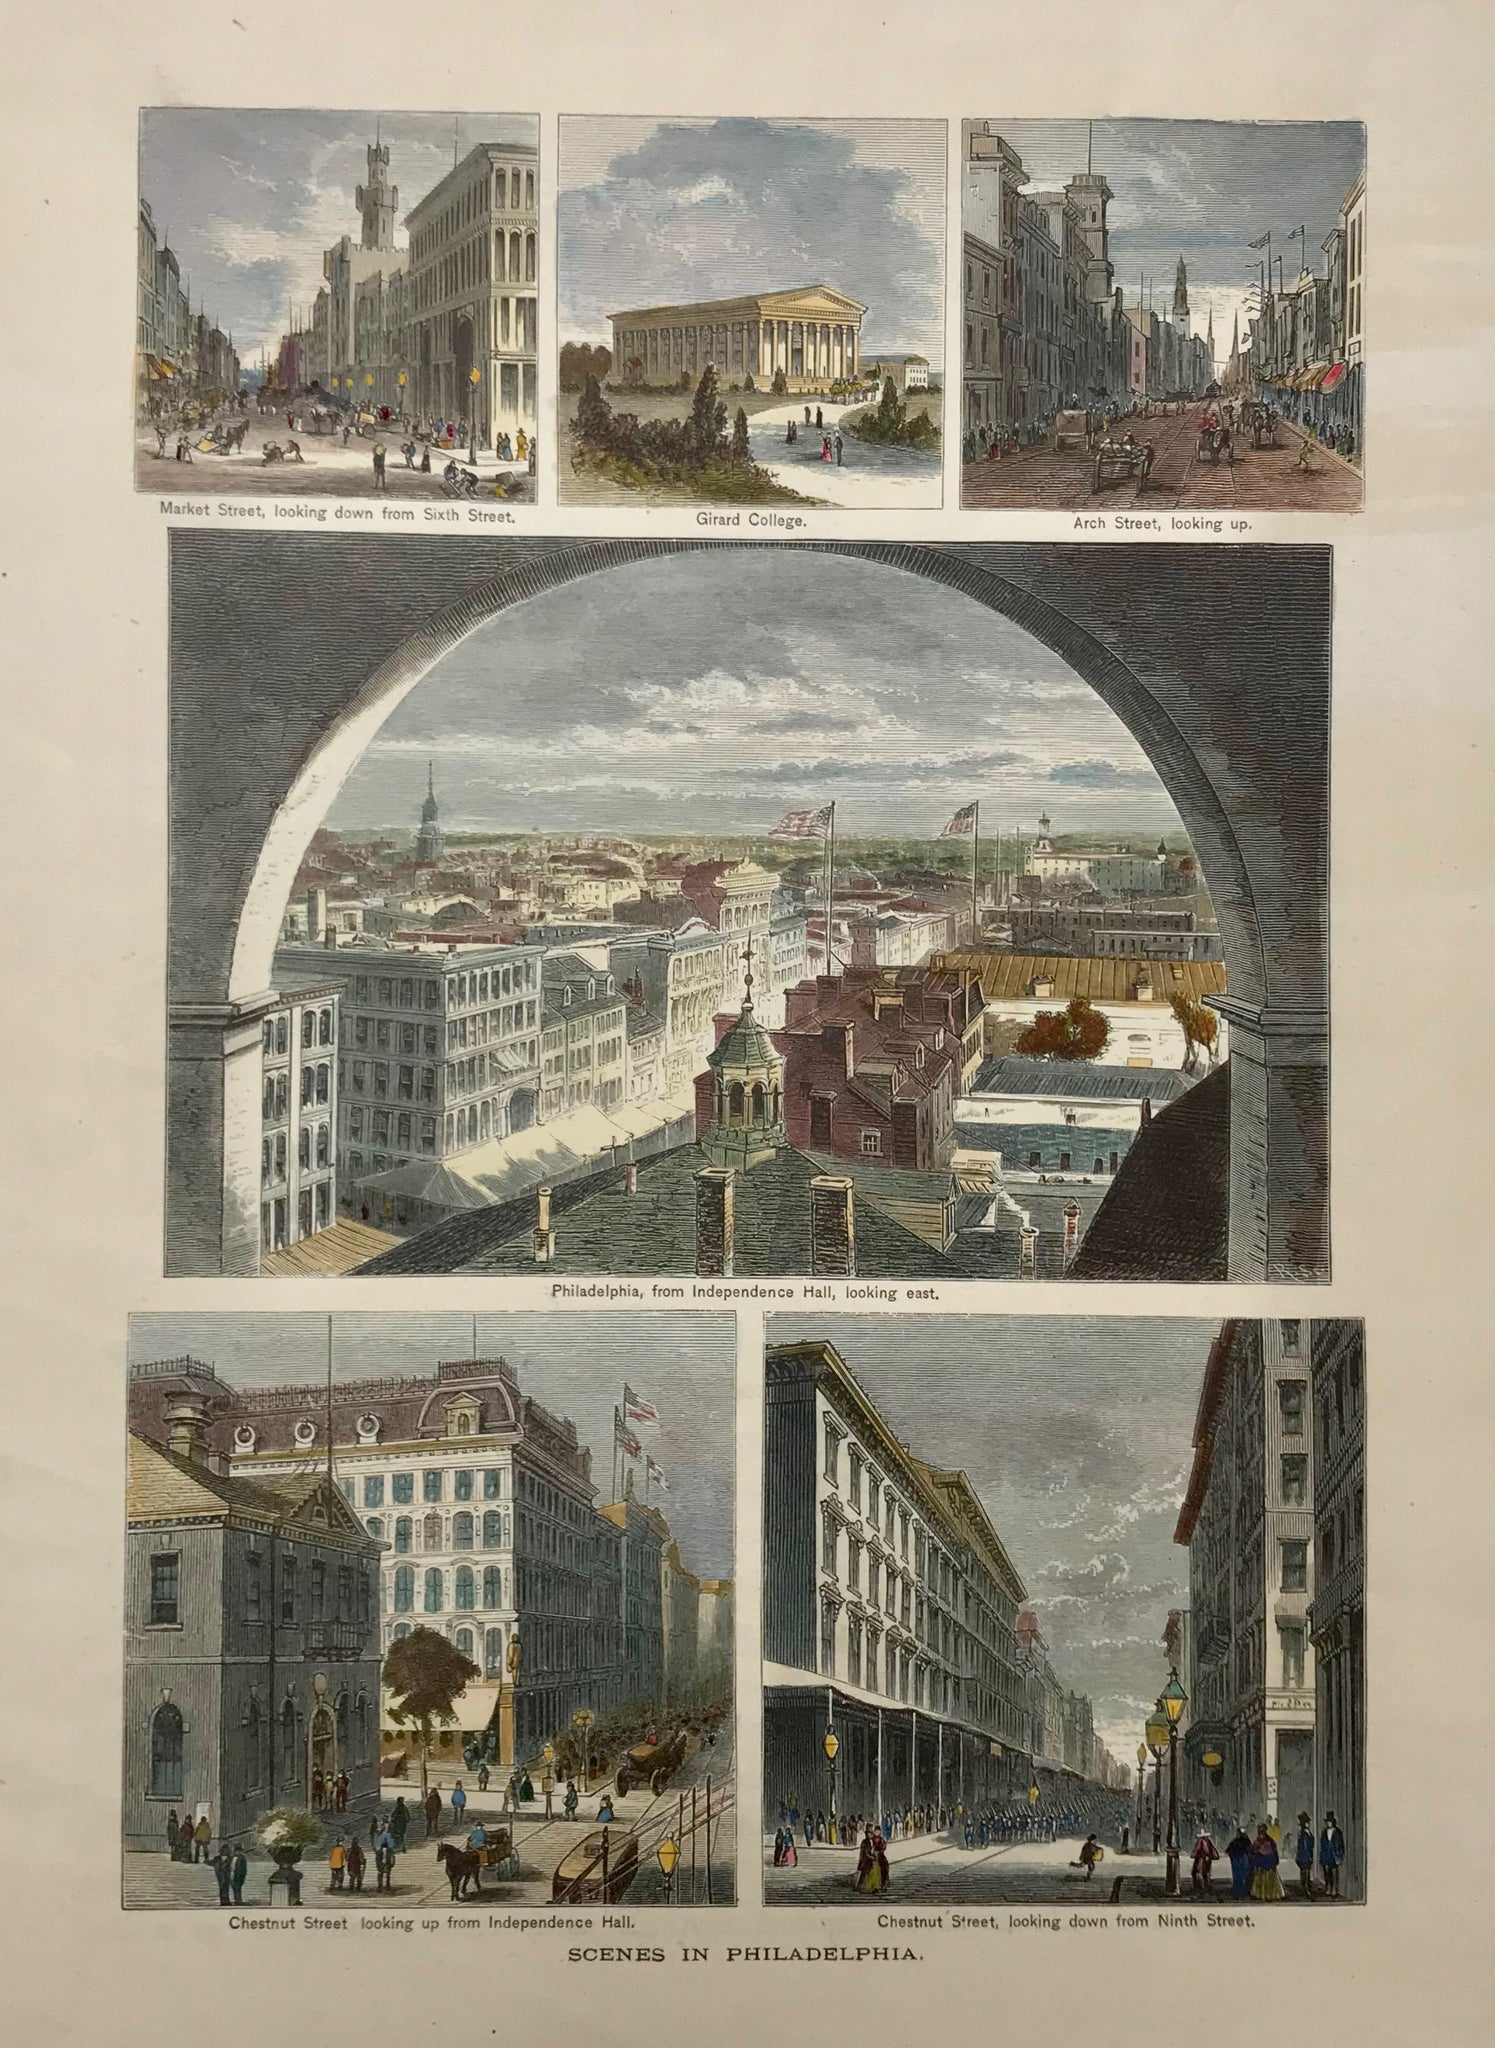 "Scenes in Philadelphia".  6 views of Philadelphia on one page. Anonymous wood engravings. Ca. 1880..  "Market Street looking down from 6th Street". "Girard College". "Arch Street looking up". "Philadelphia from Independence Hall, looking east". "Chestnut Street looking up from Independence Hall". Chestnut Street looking down from 9th Street".